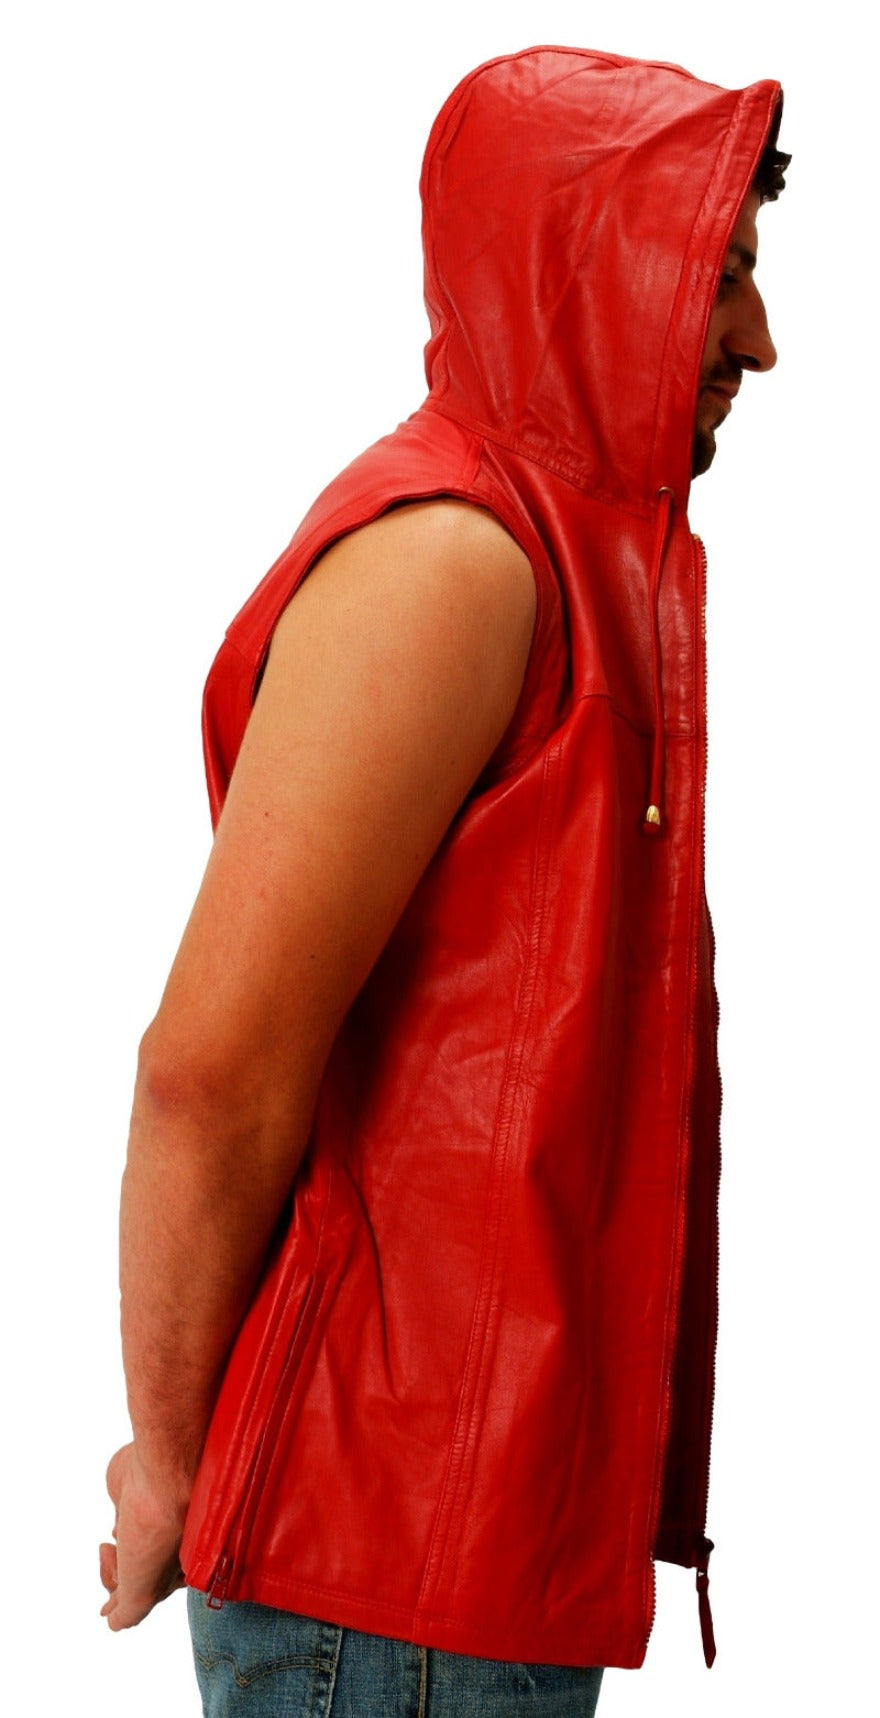 Picture of a model wearing our Mens Hooded Leather Vest  in Red,, Side view with hood up